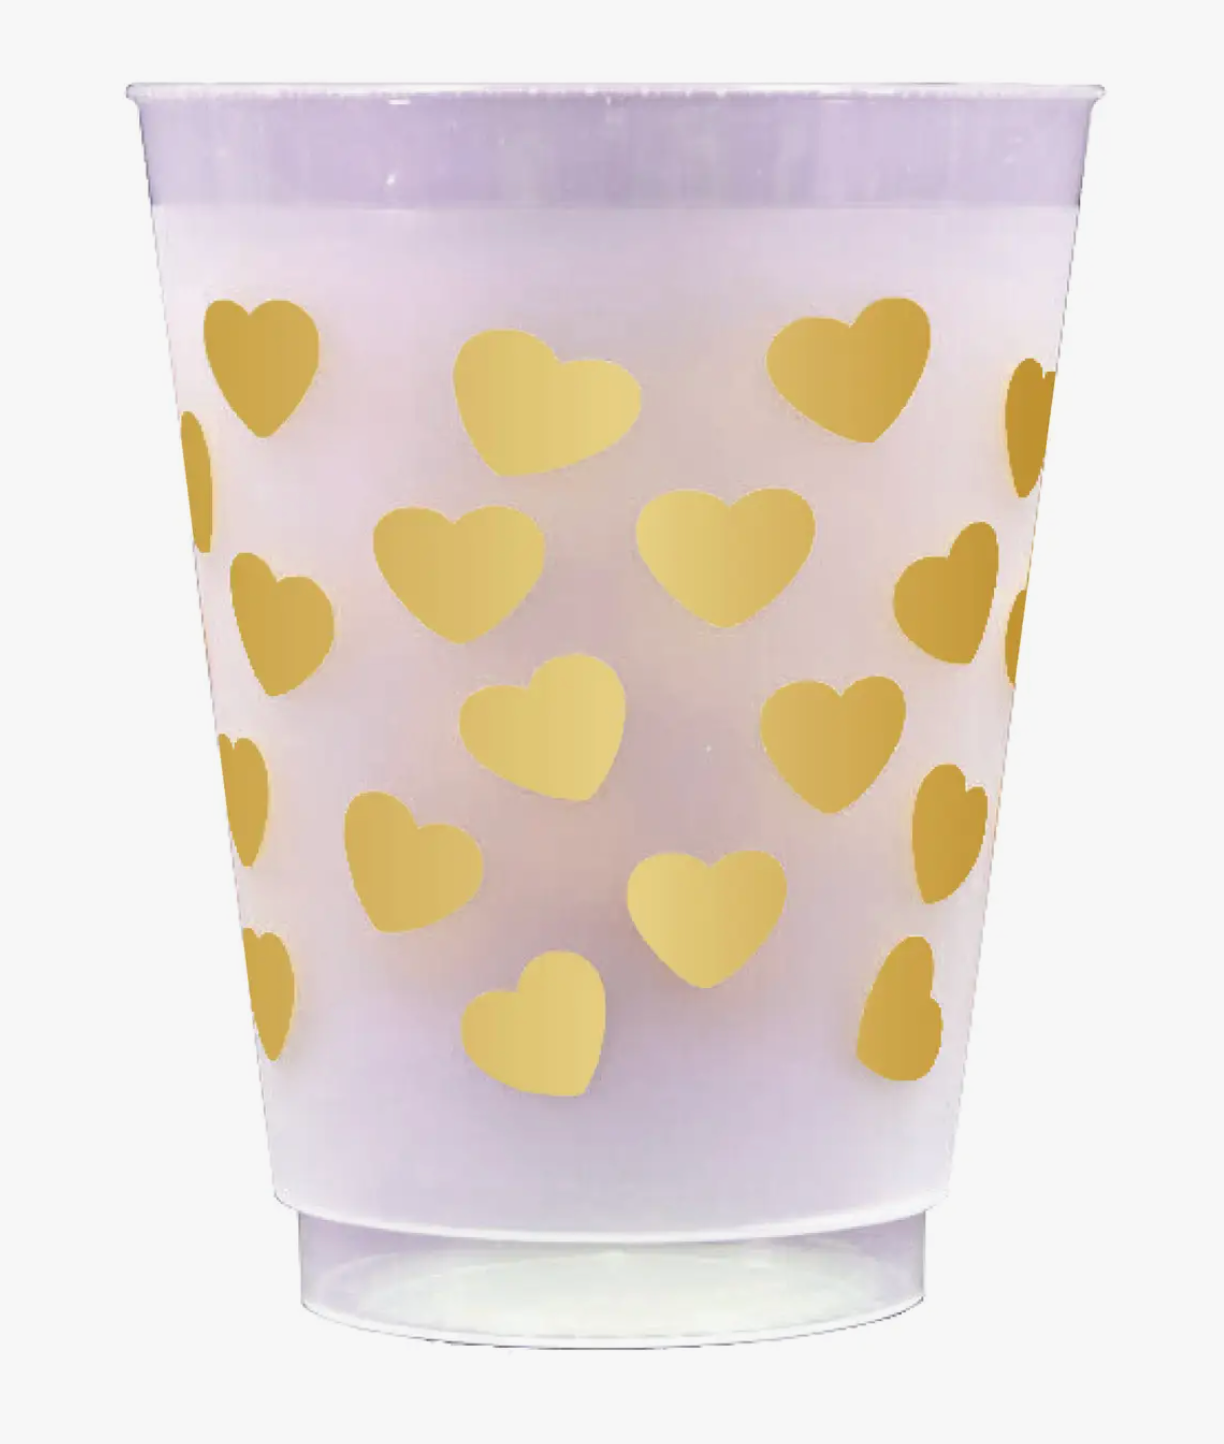 Gold Heart Valentine's Day Reusable Cups - Set of 10 Cups